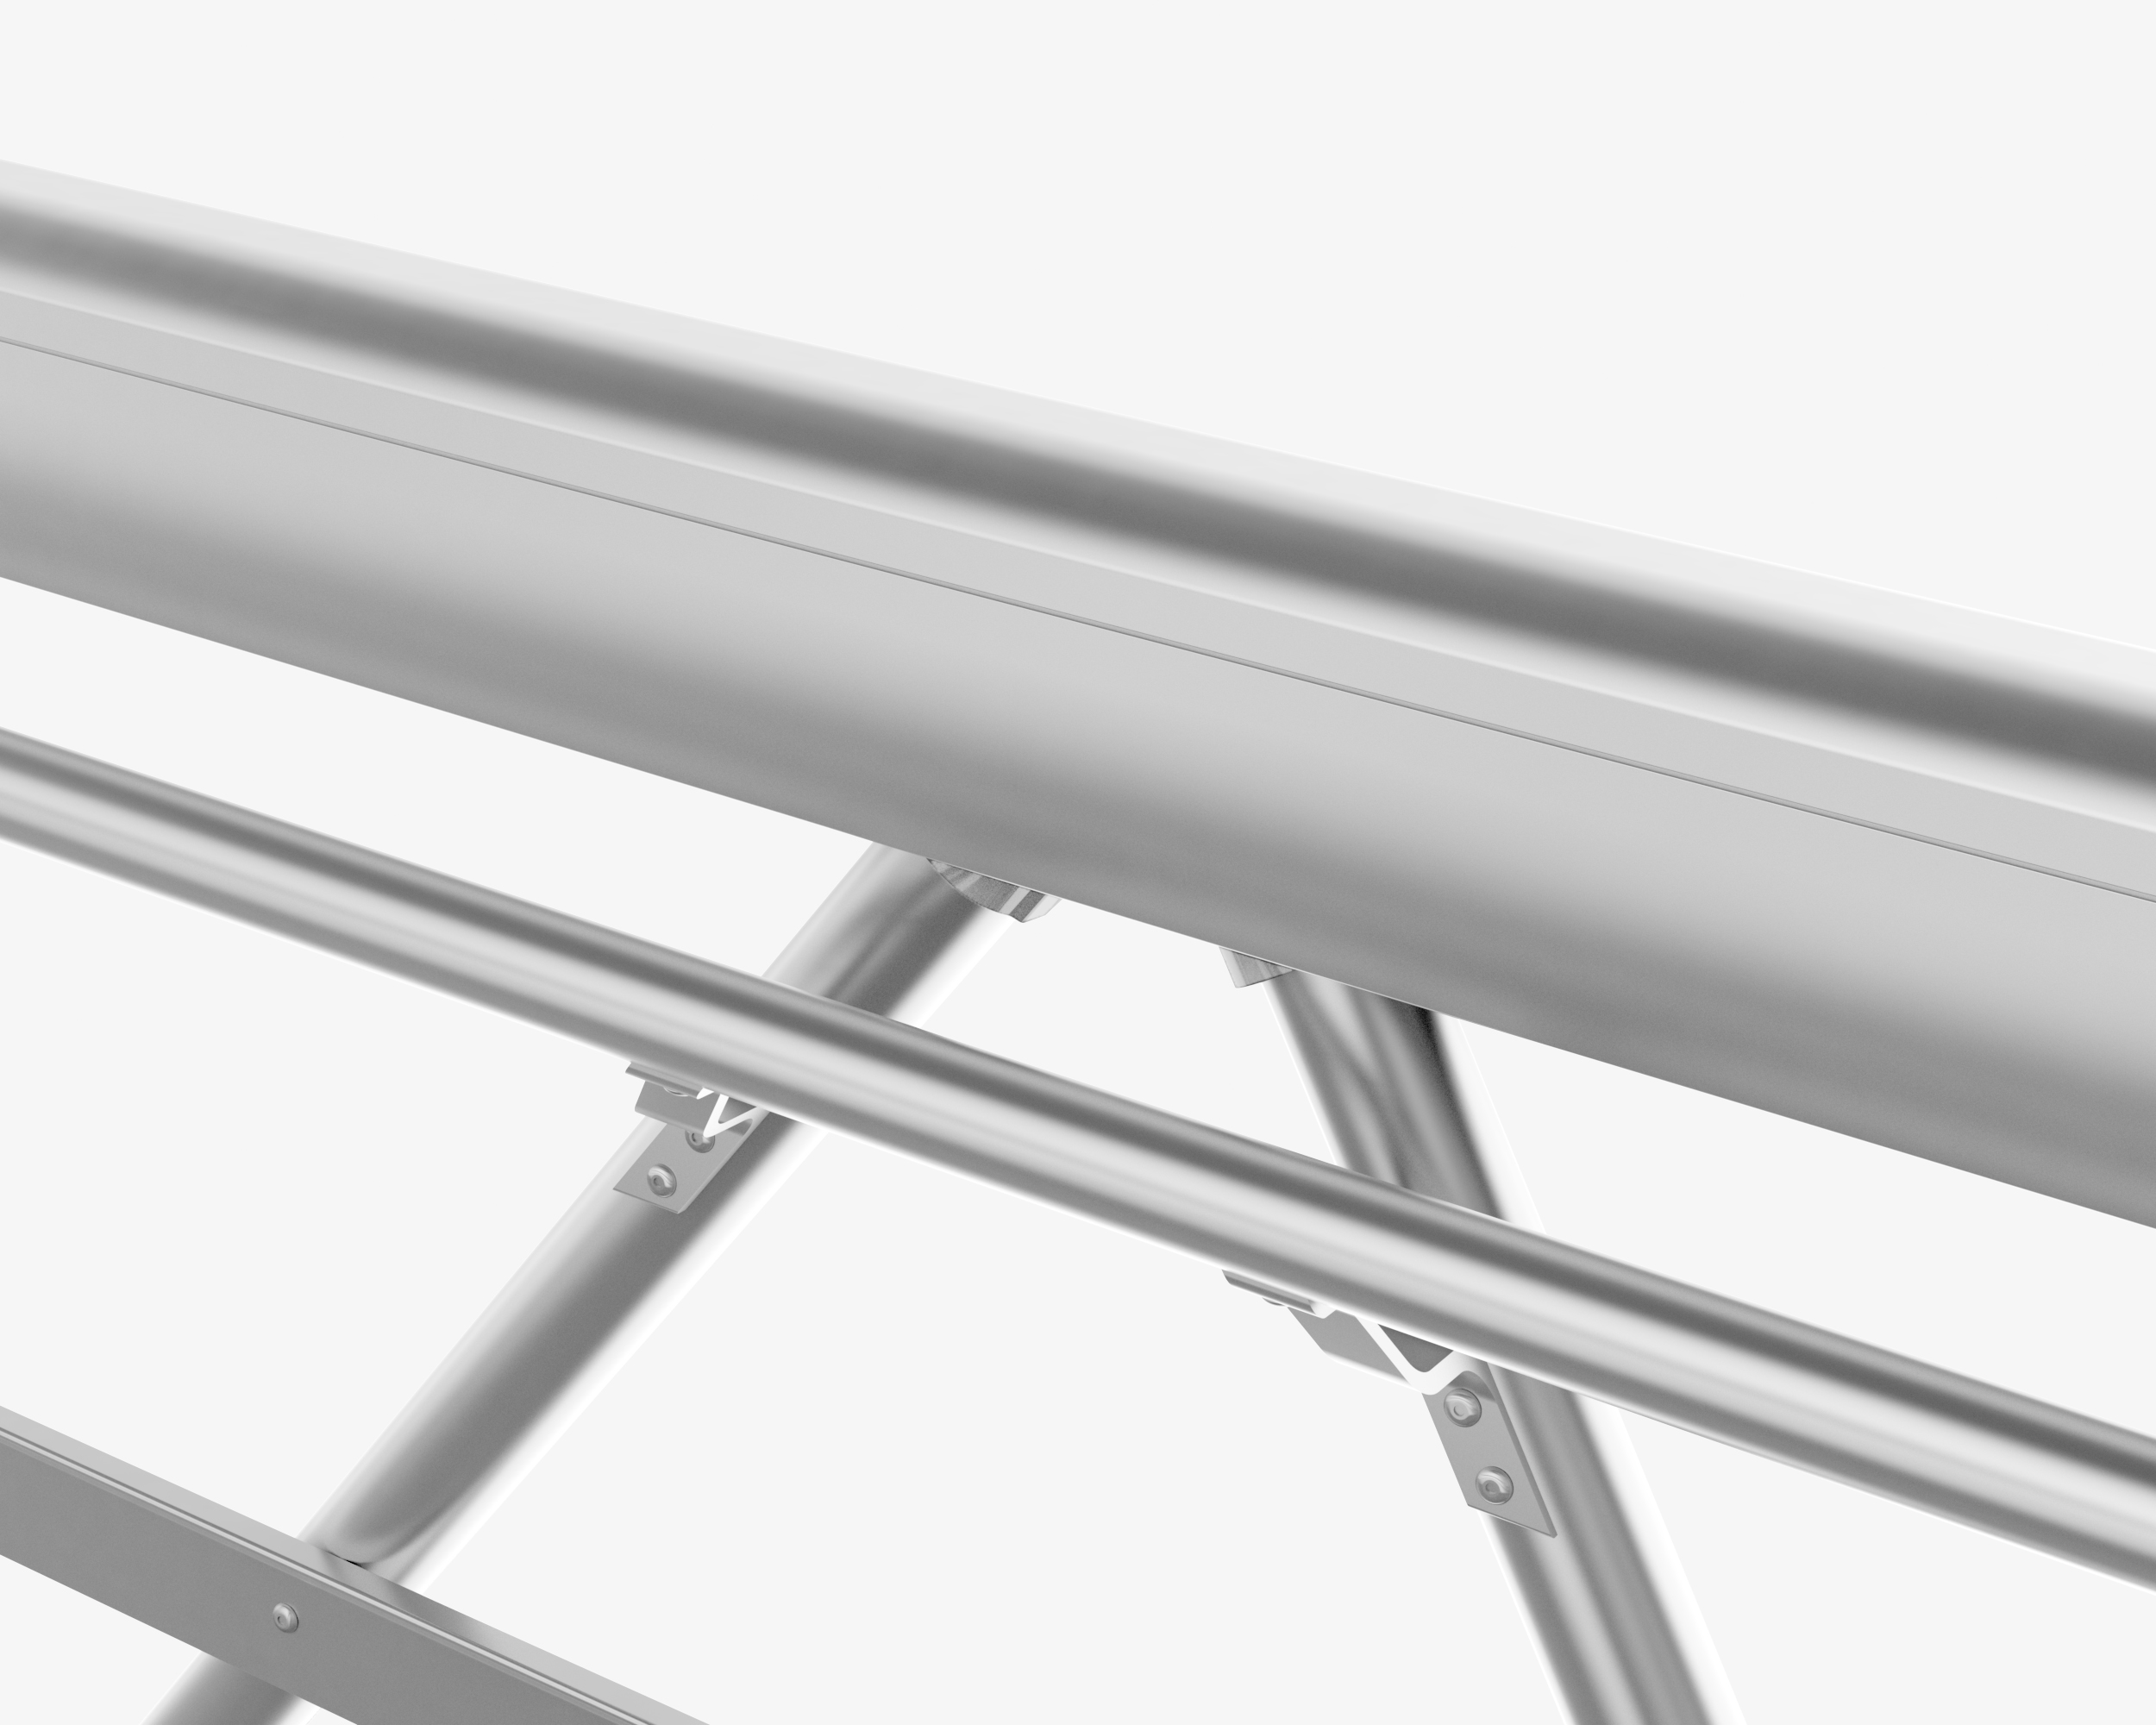 Aluminum handrails with 2 inch clearance